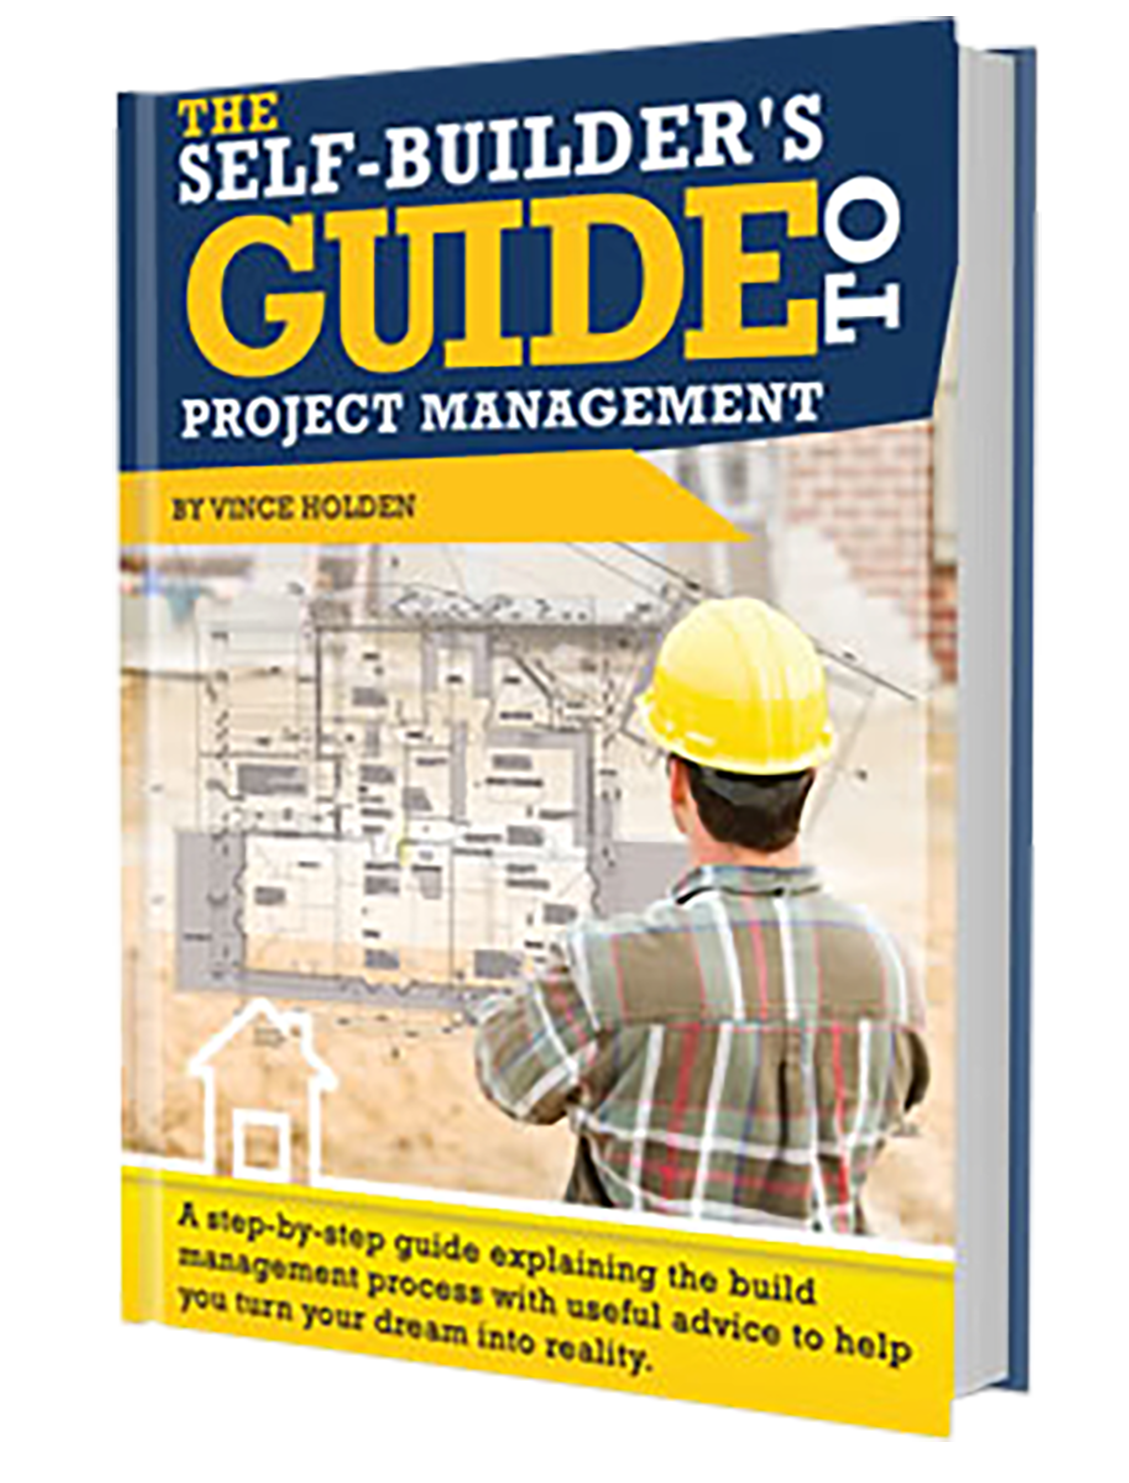 The Self-Builders Guide to the Project Management